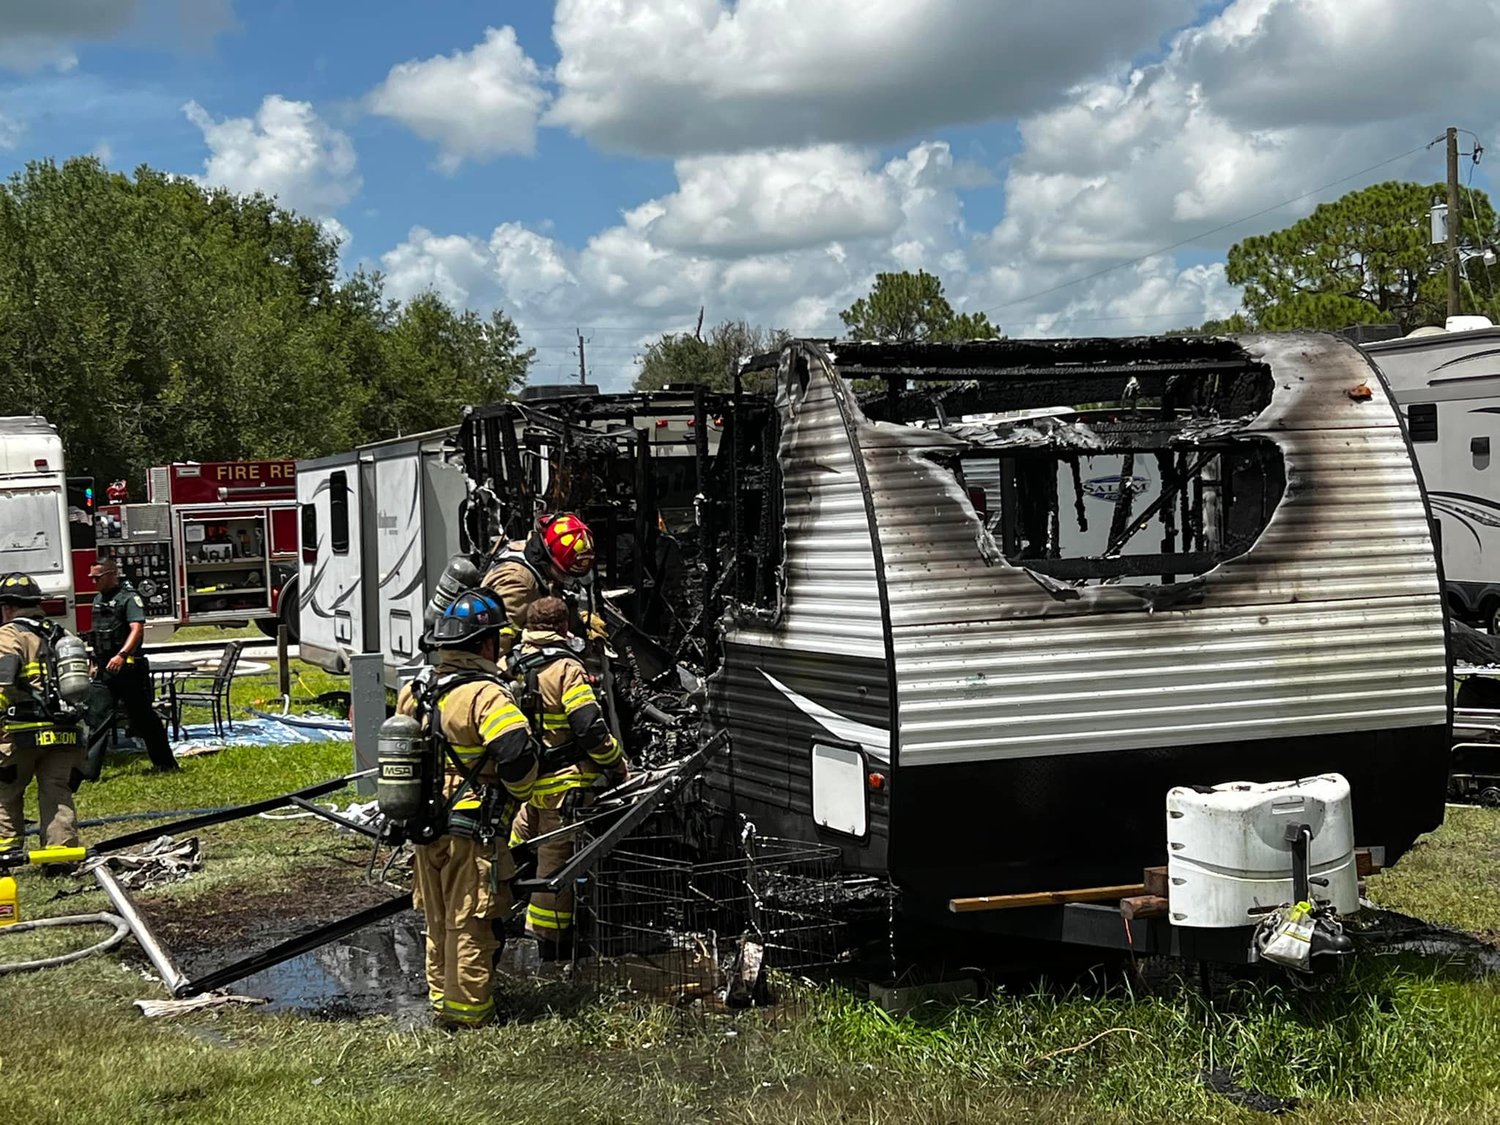 A July 24 fire destroyed the Wendy Kennett's RV and claimed the lives of her four dogs.